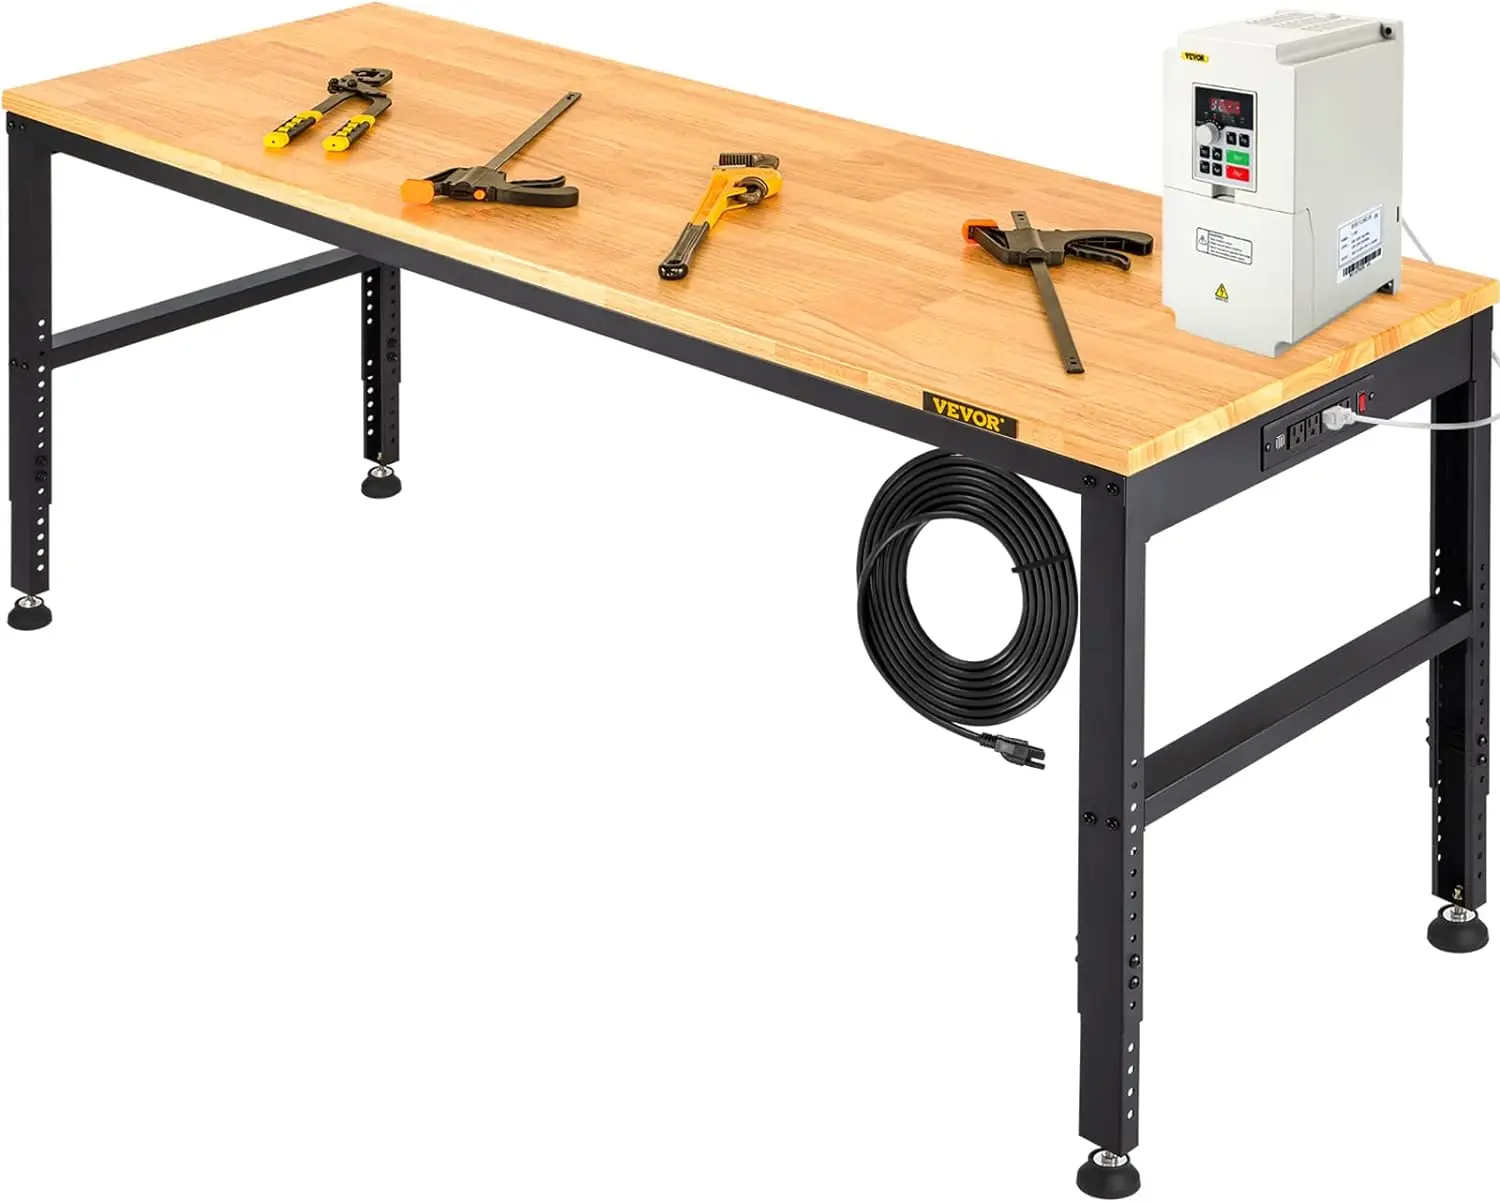 

VEVOR 60" Adjustable Workbench, Heavay Duty Workstation 2000 LBS Load Capacity, with Power Outlets & Rubber Wood Top & Metal